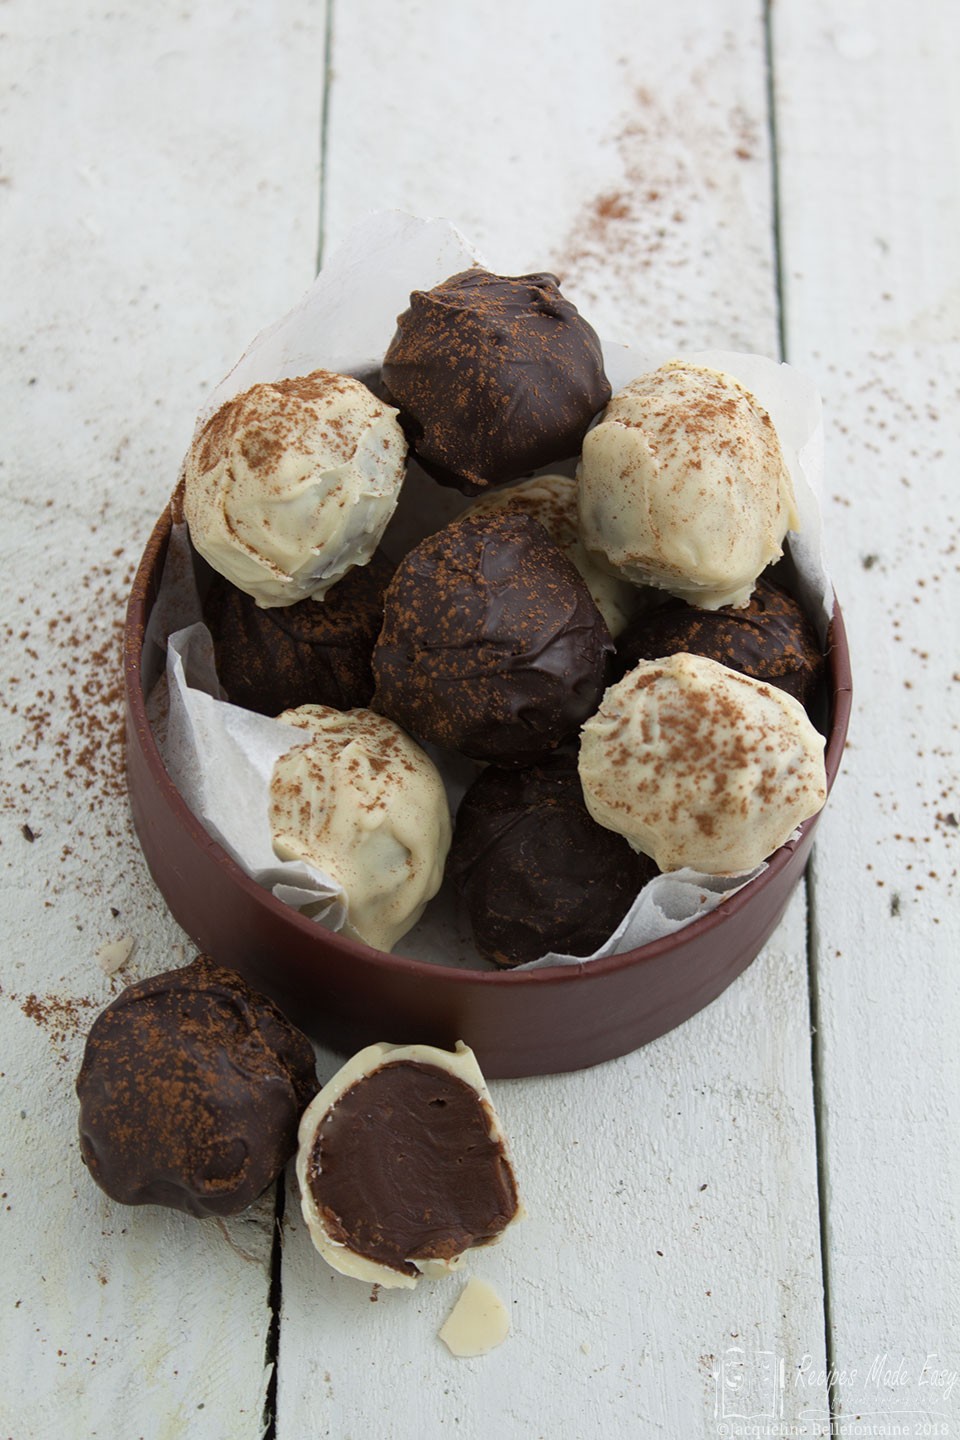 Recipes Made Easy hand-rolled coffee truffles